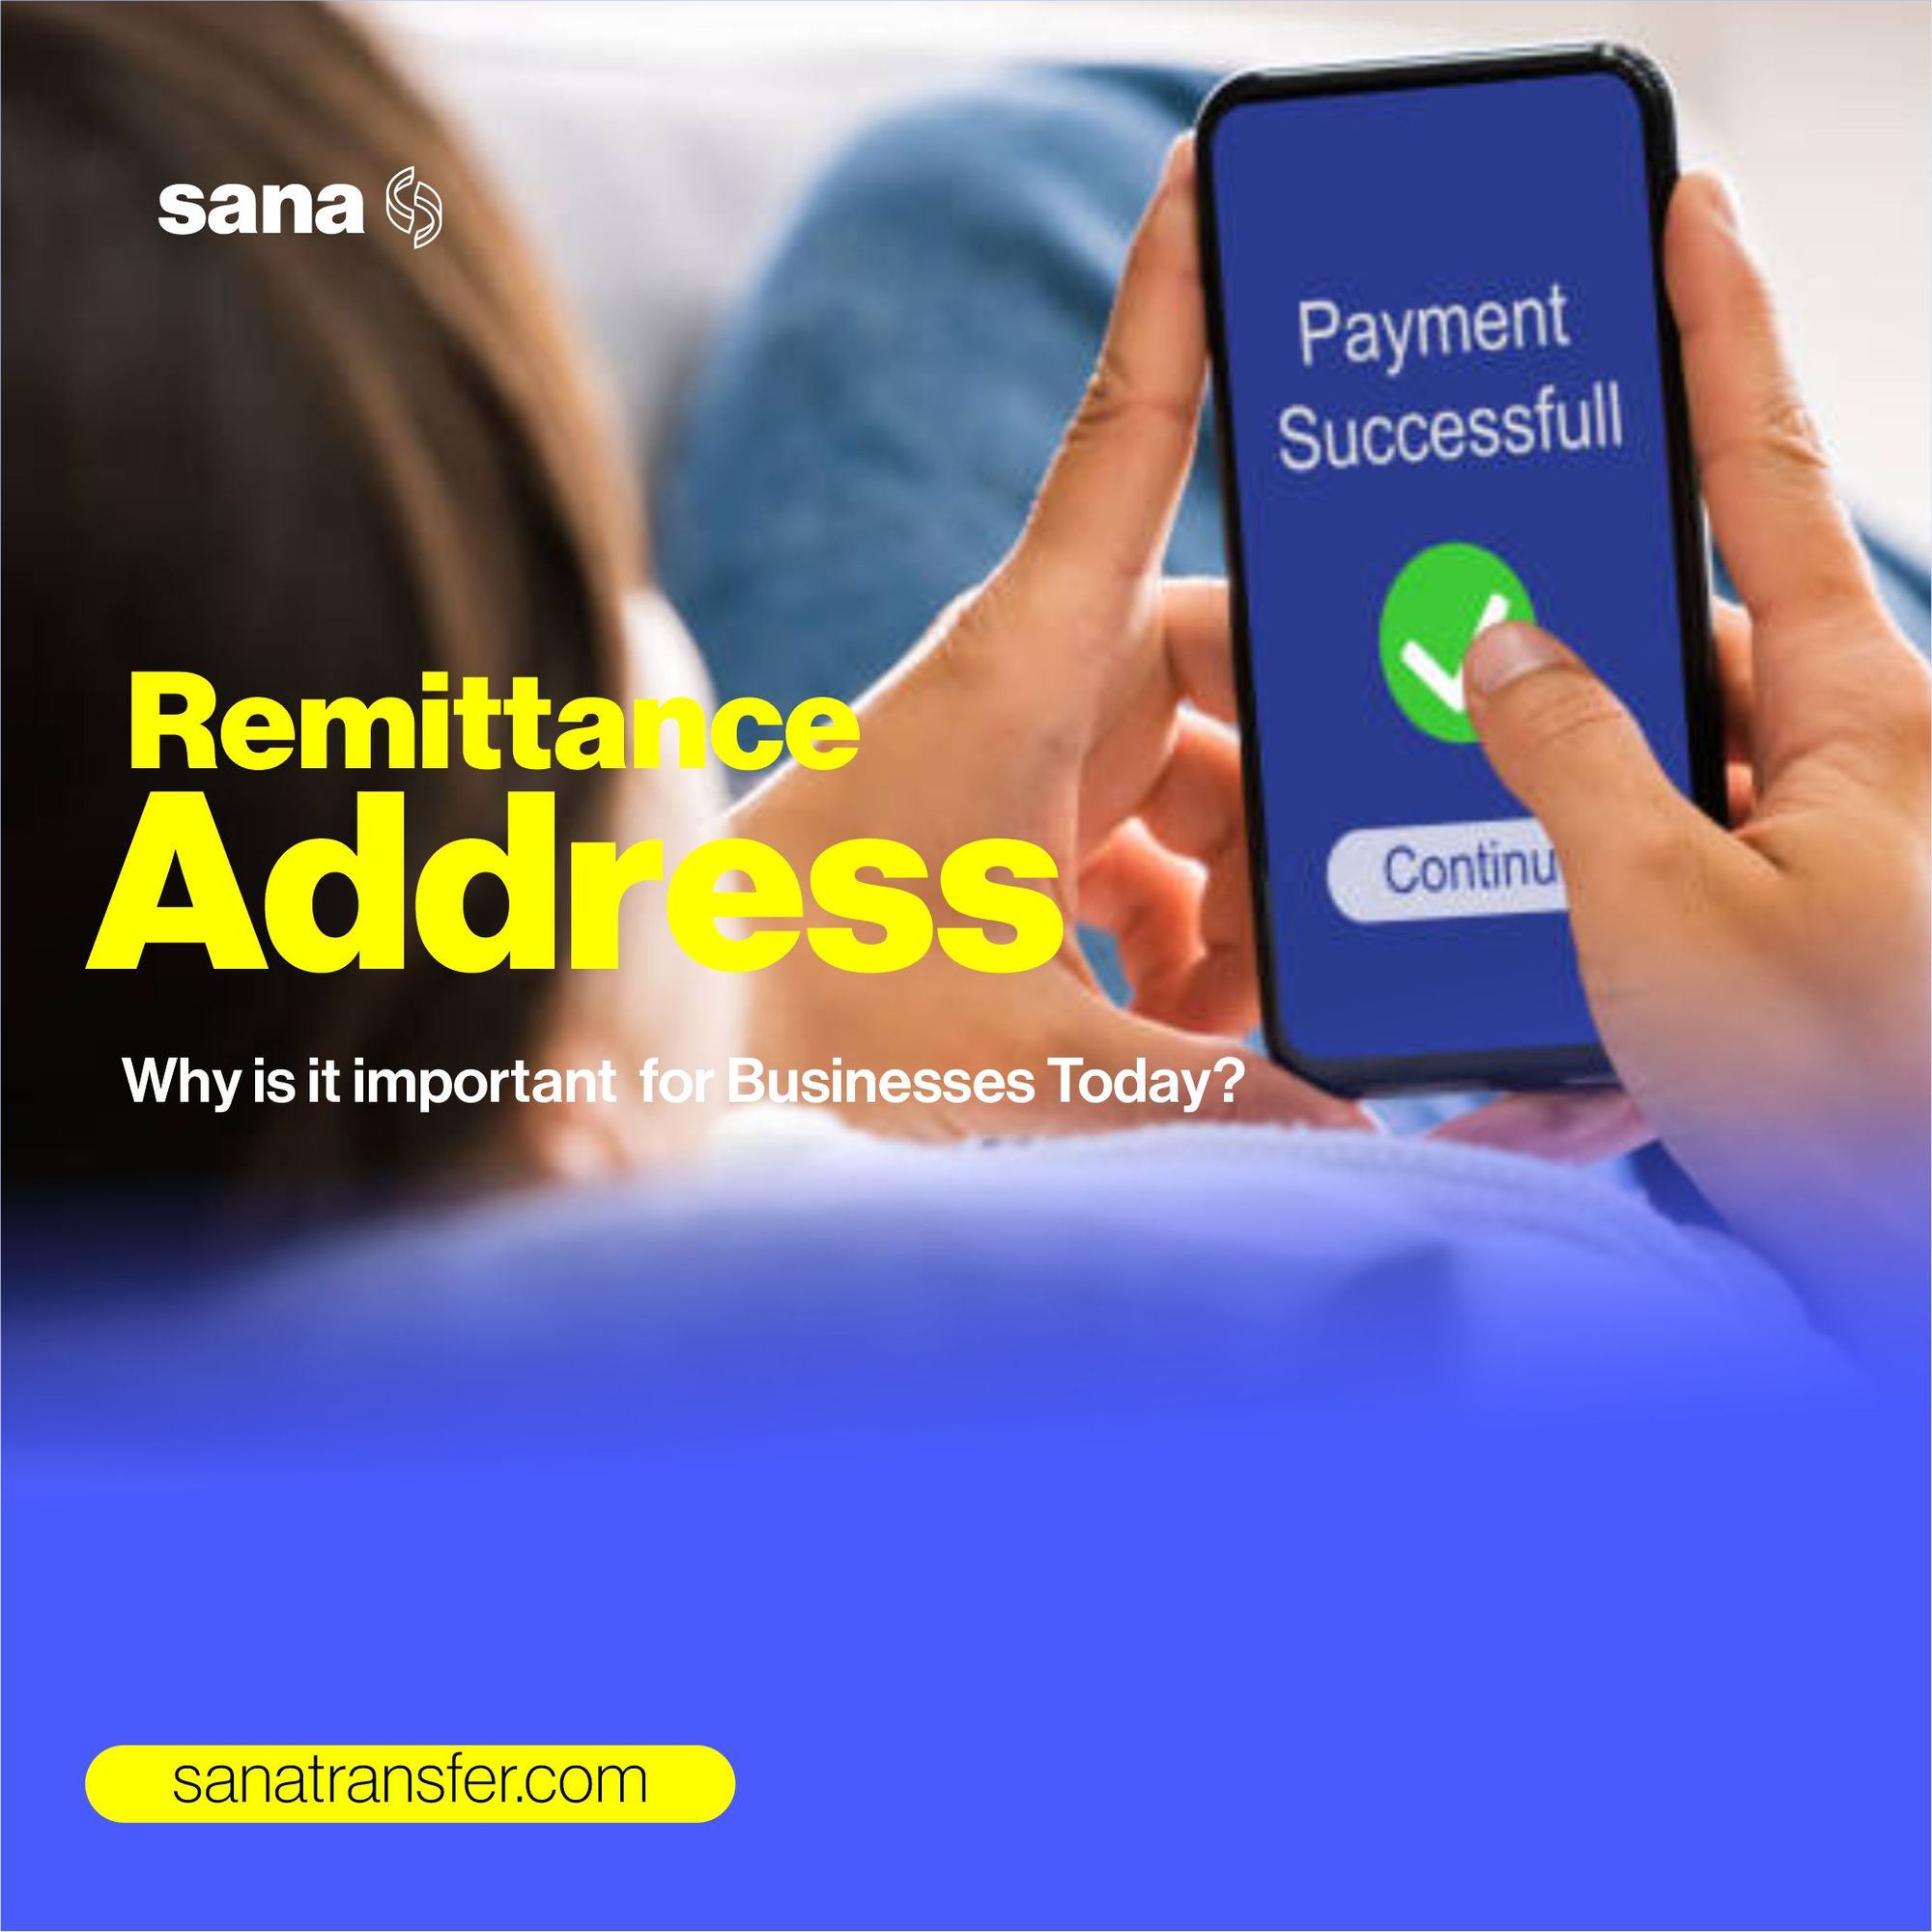 What is a Remittance Address?